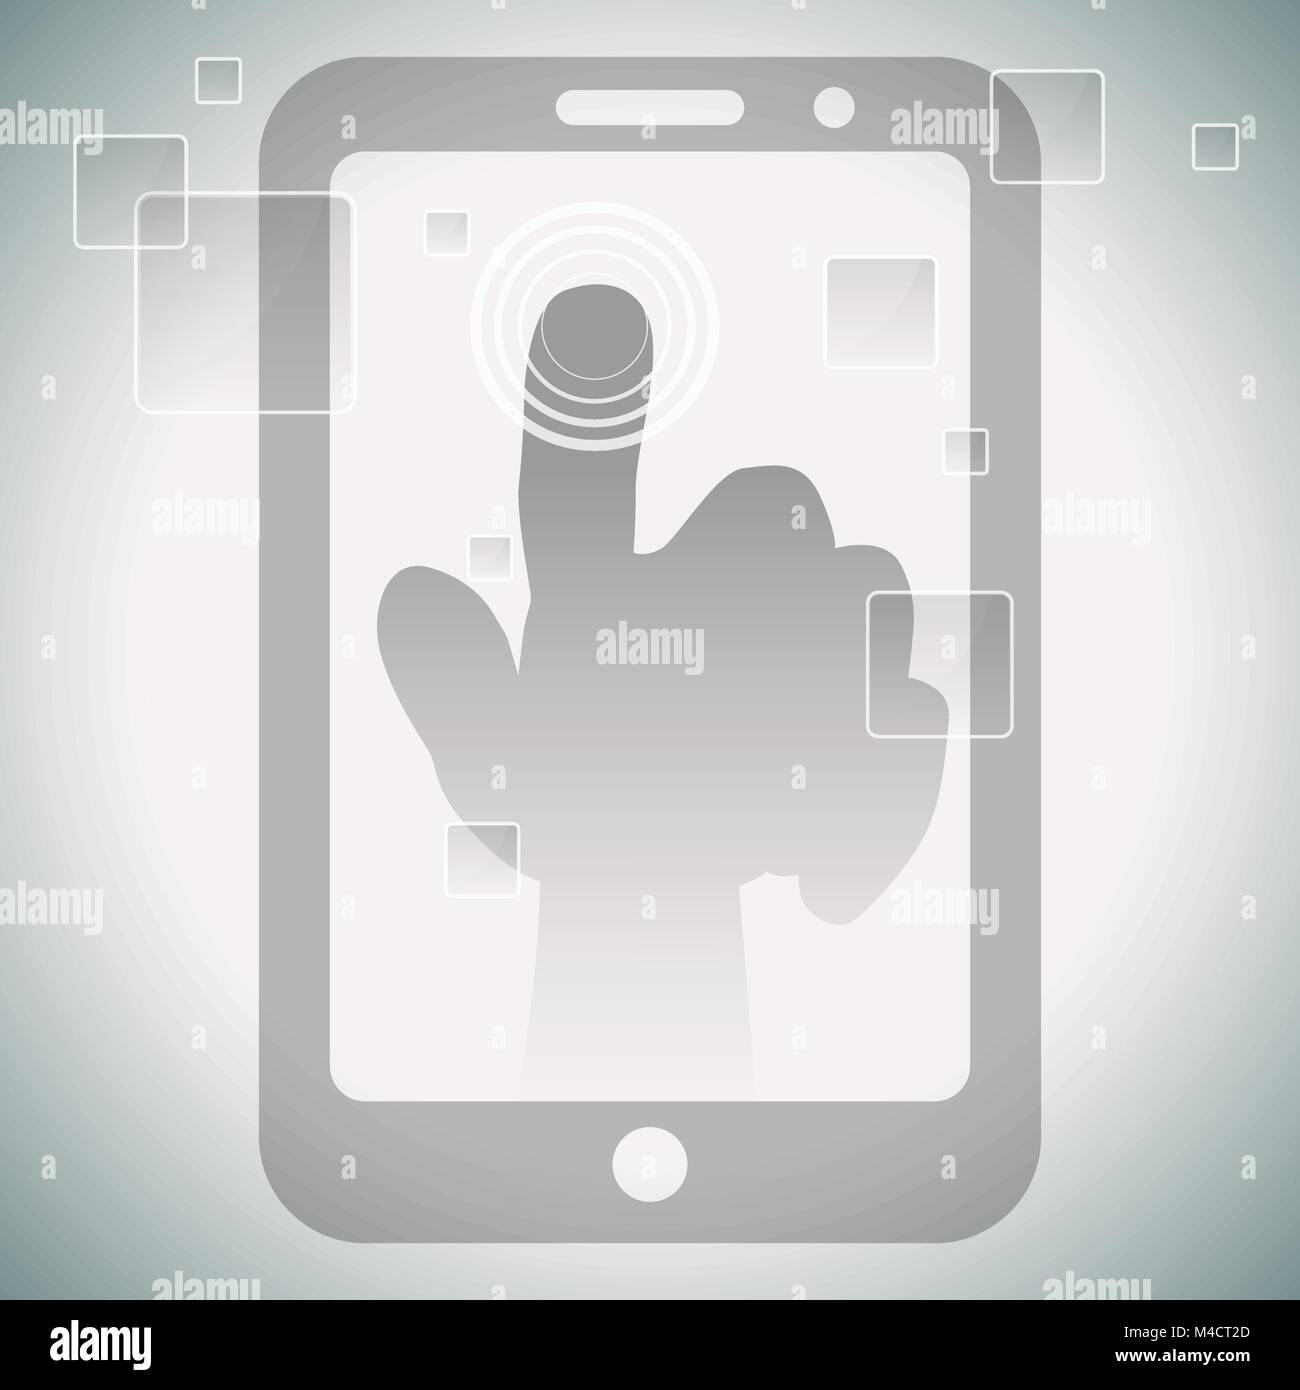 An image of touch screen technology. Stock Vector